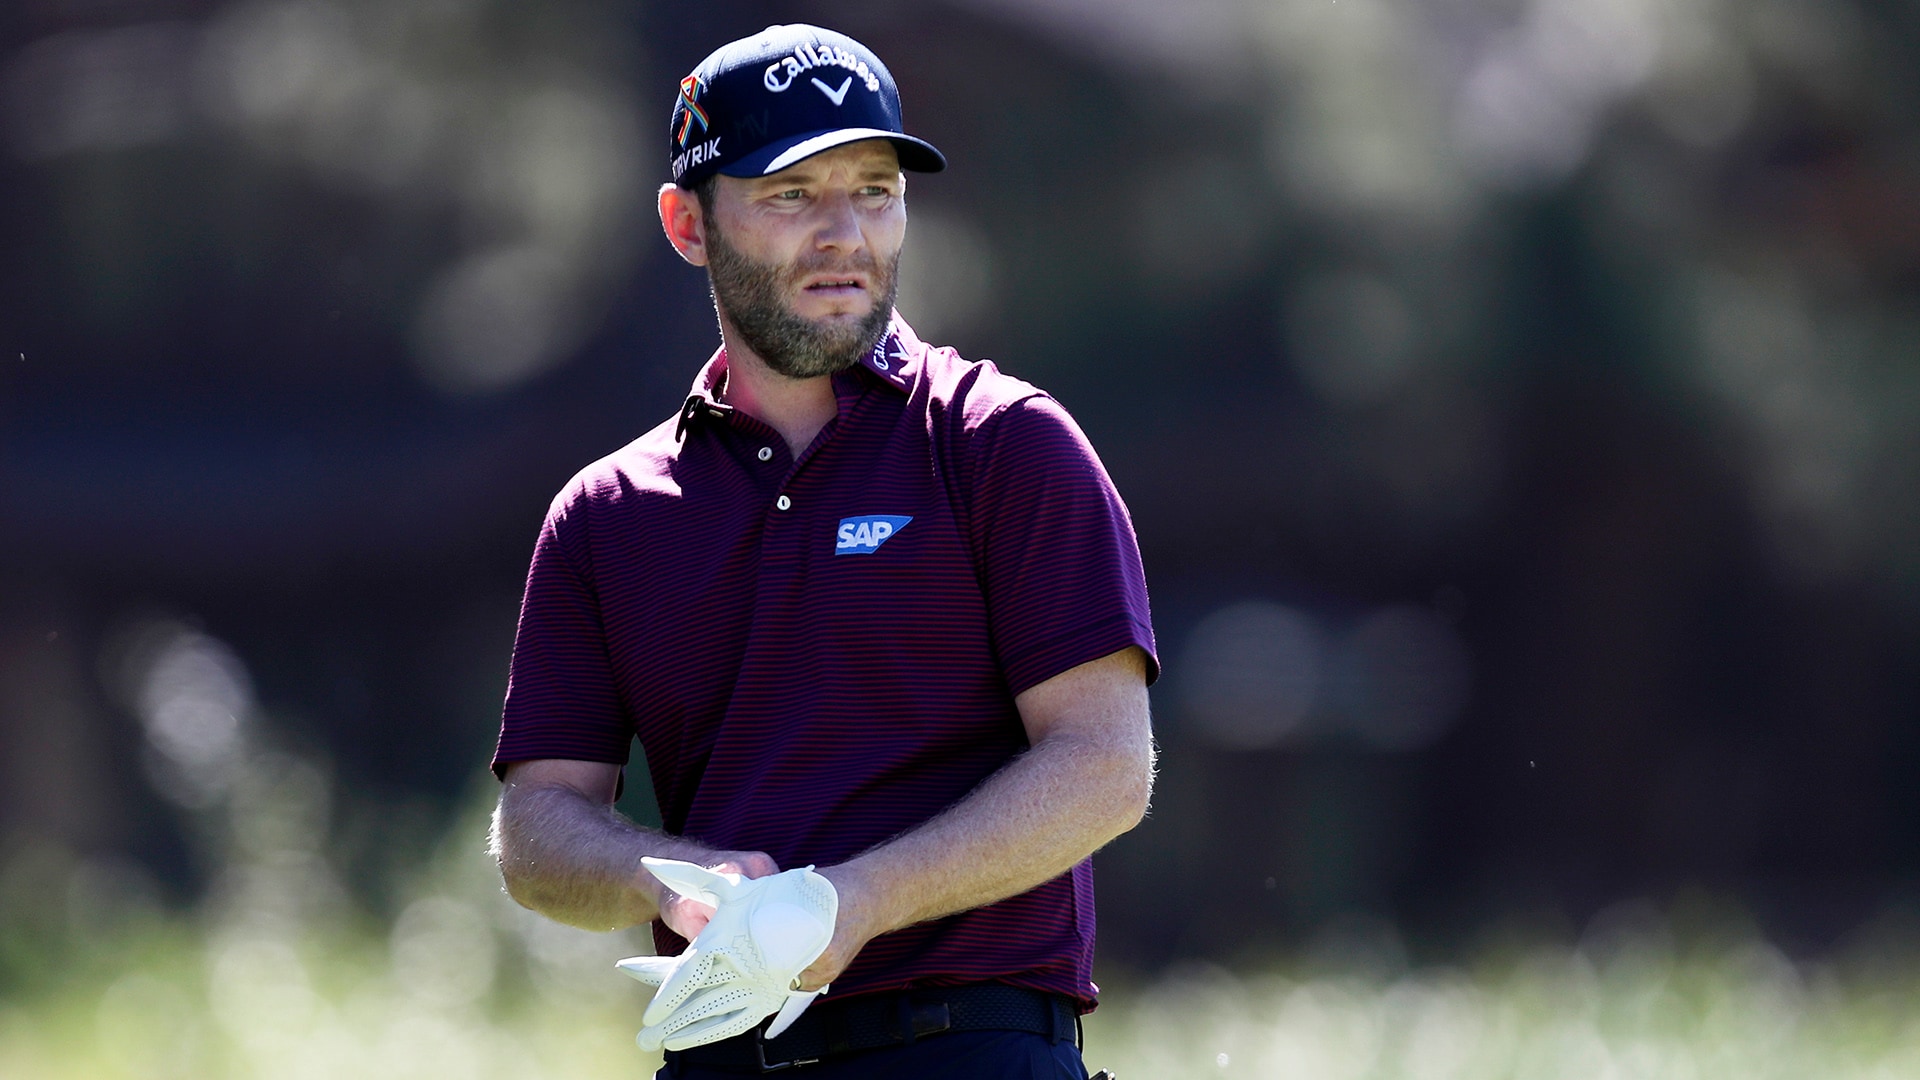 Positive COVID-19 test results keep Branden Grace out of majors, and put him back in